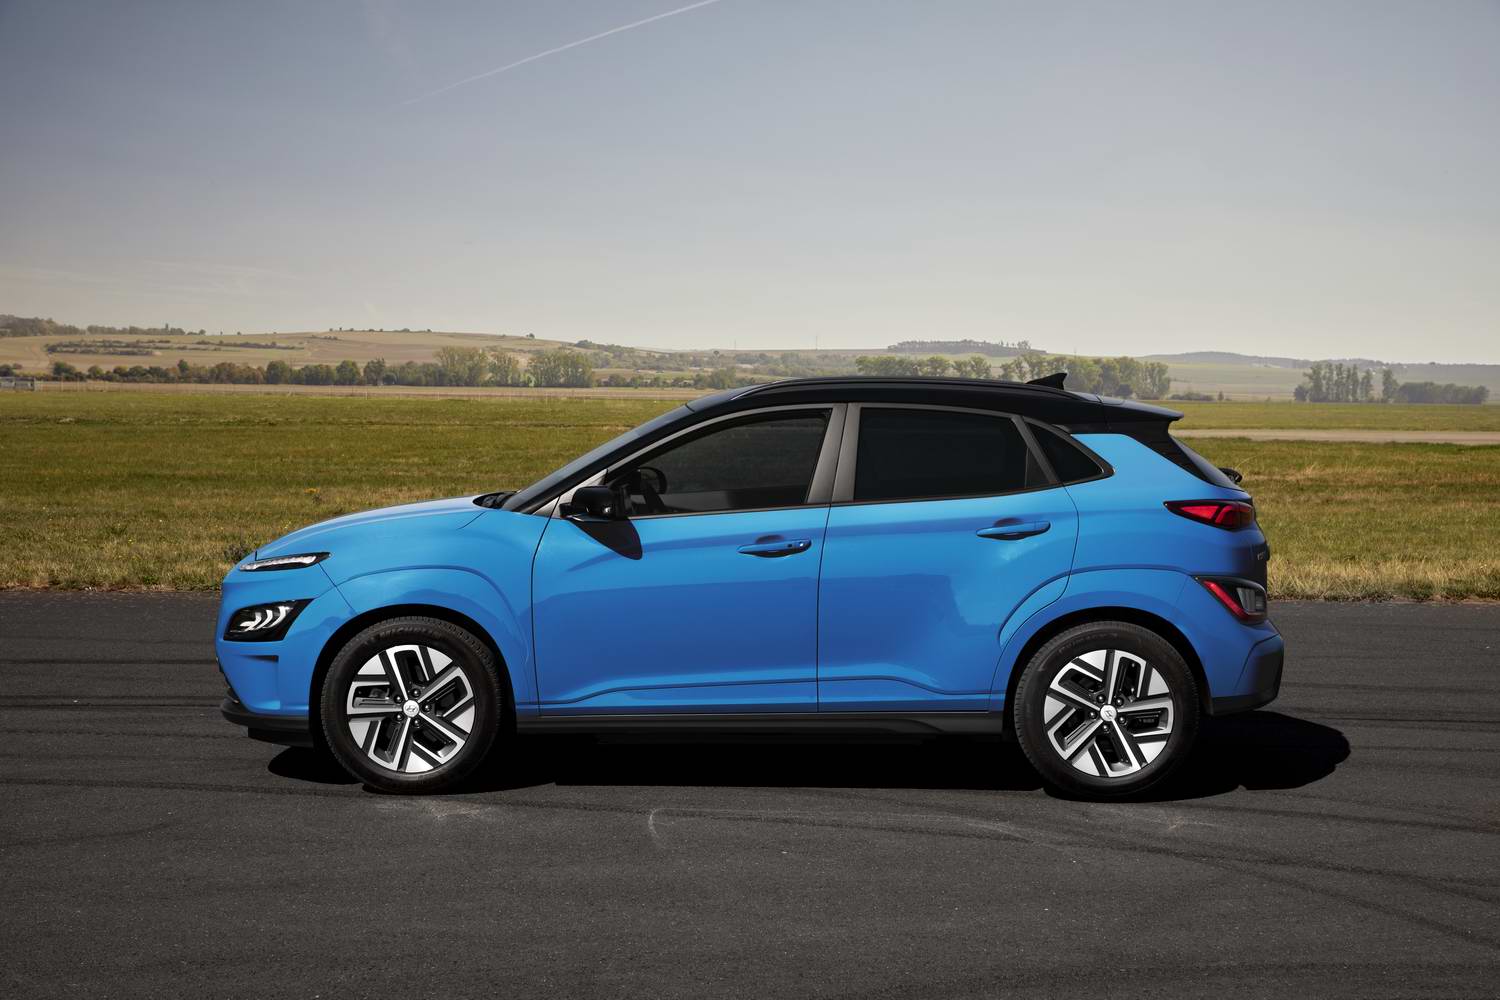 New look for 2021 Hyundai Kona Electric - car and motoring news by ...